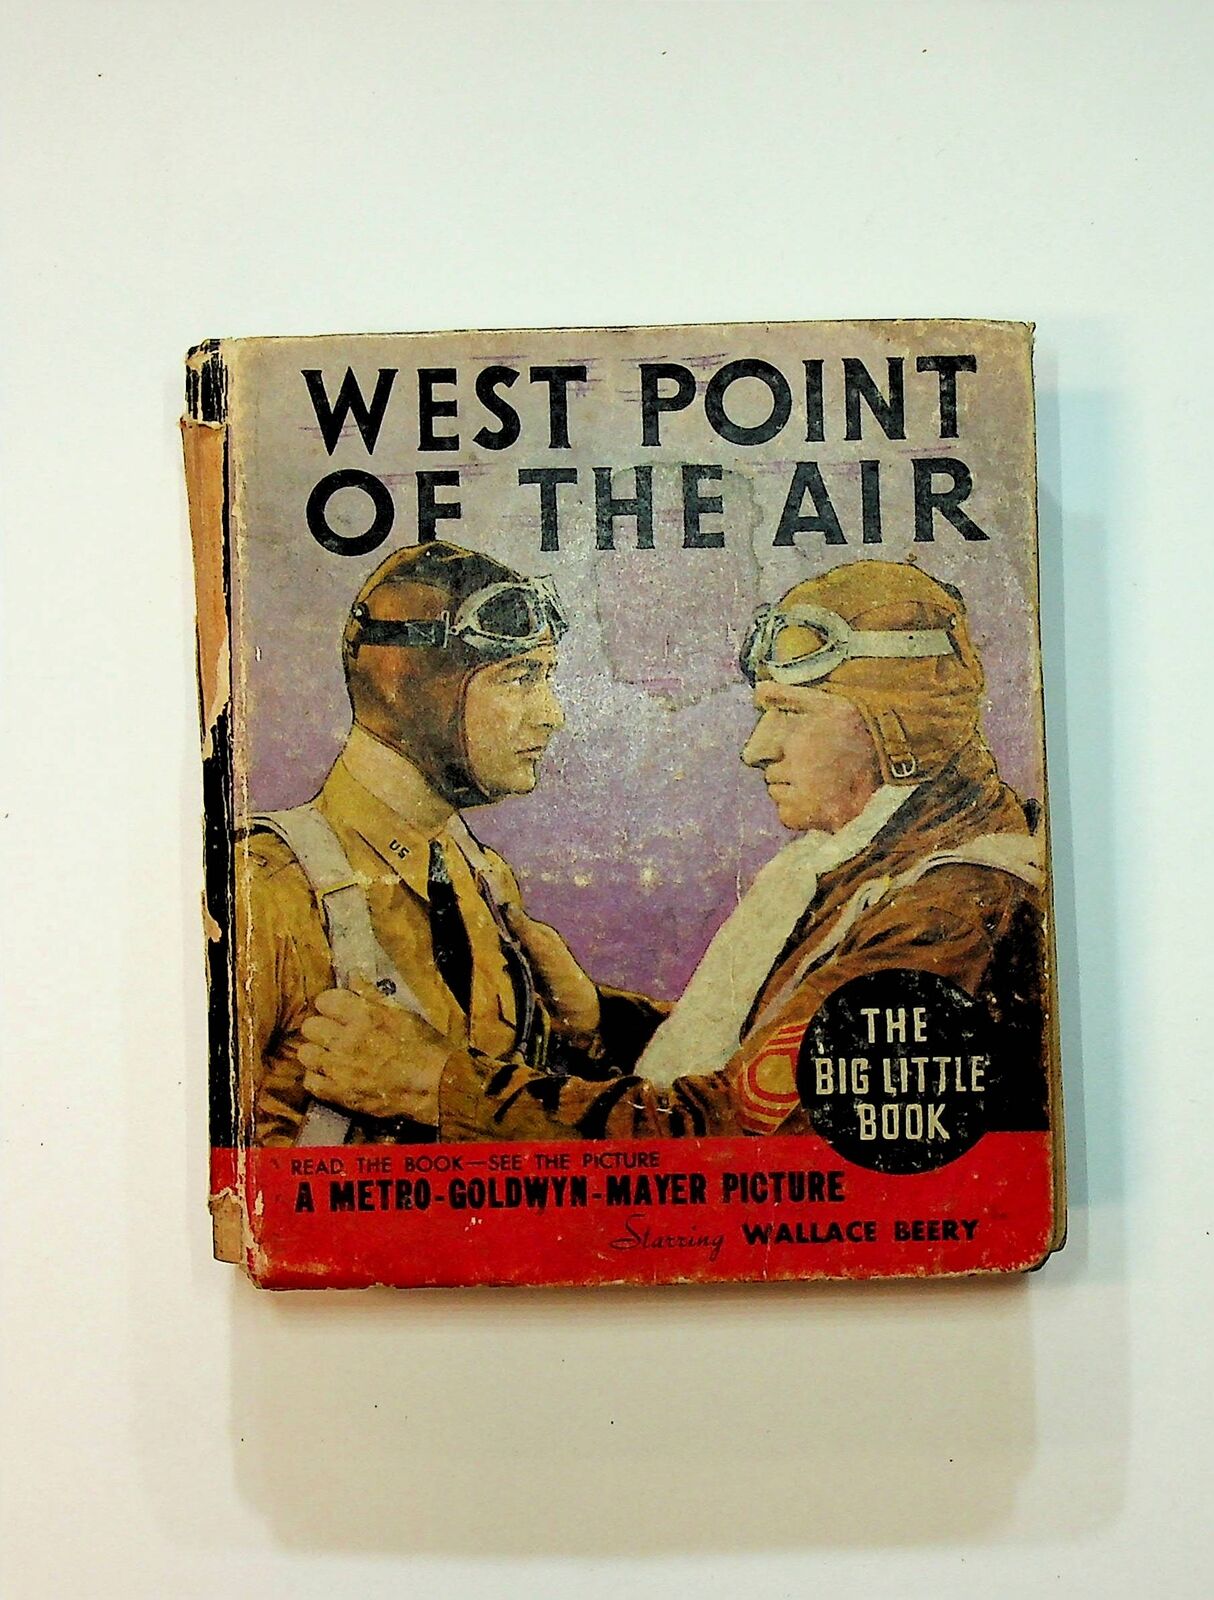 West Point of the Air #1164 PR 1935 Low Grade